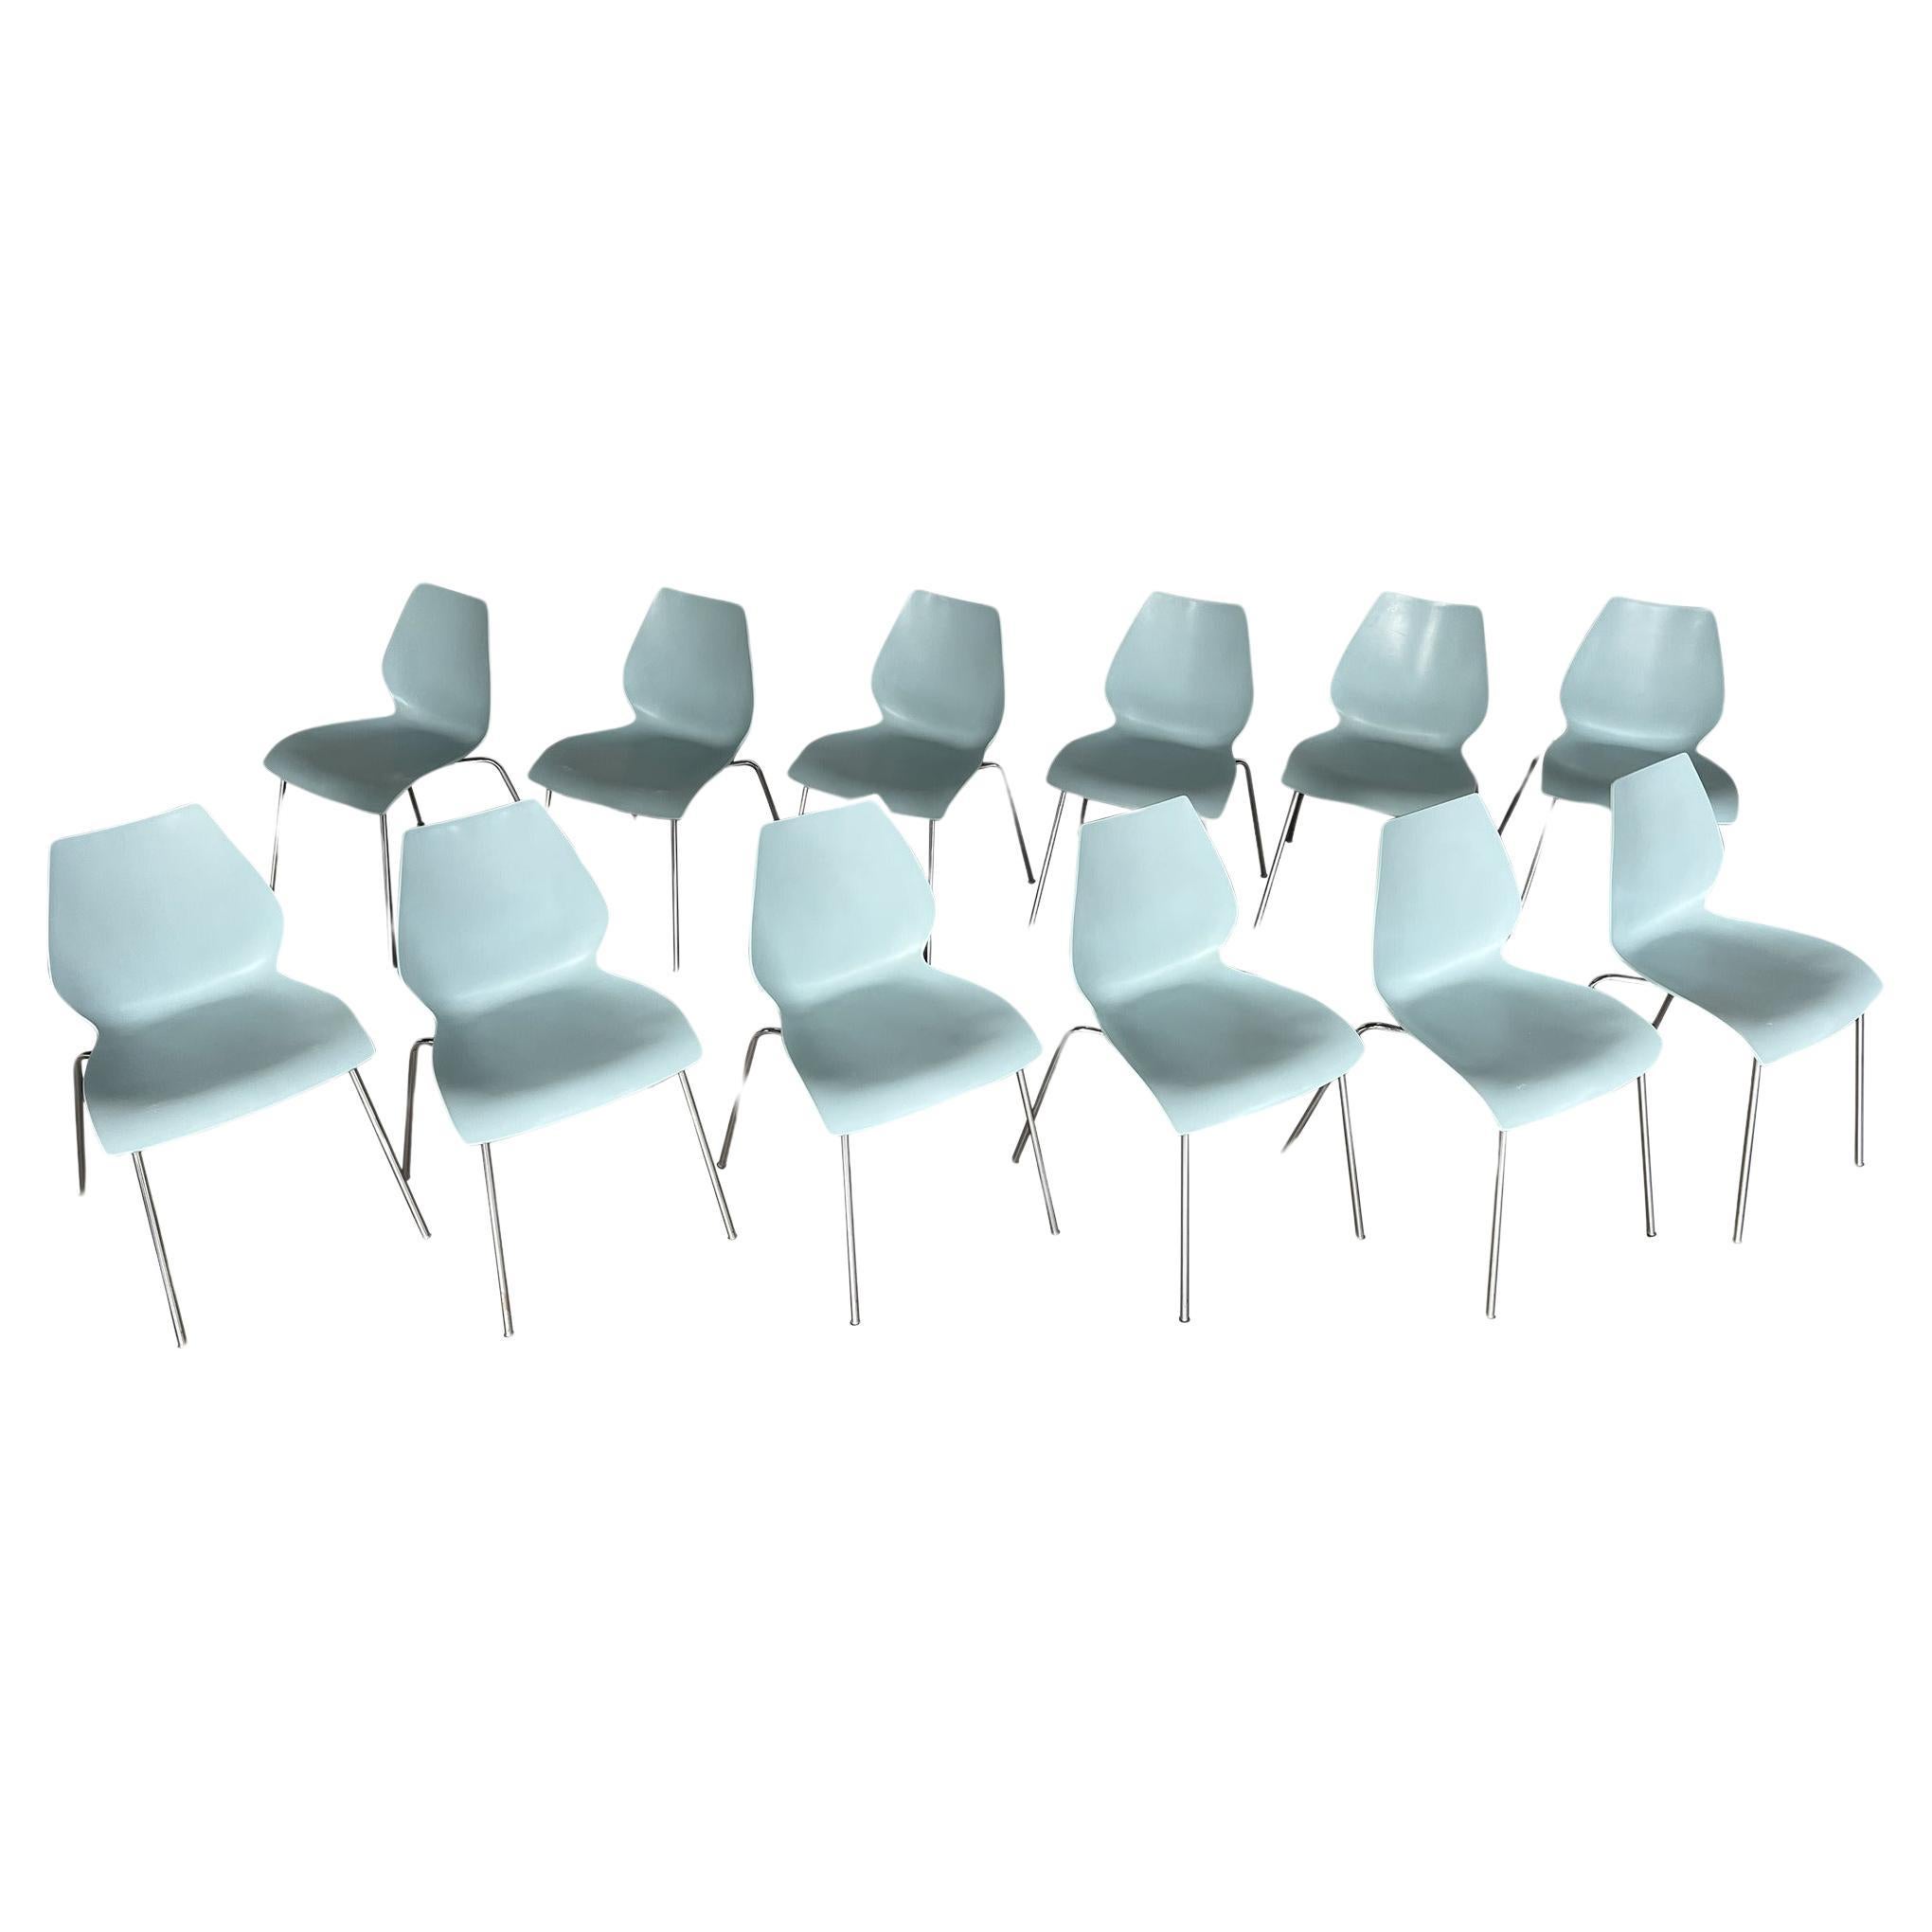 Italian Maui Pale Blue Side Chairs Vico Magistretti for Kartell - Set of 12